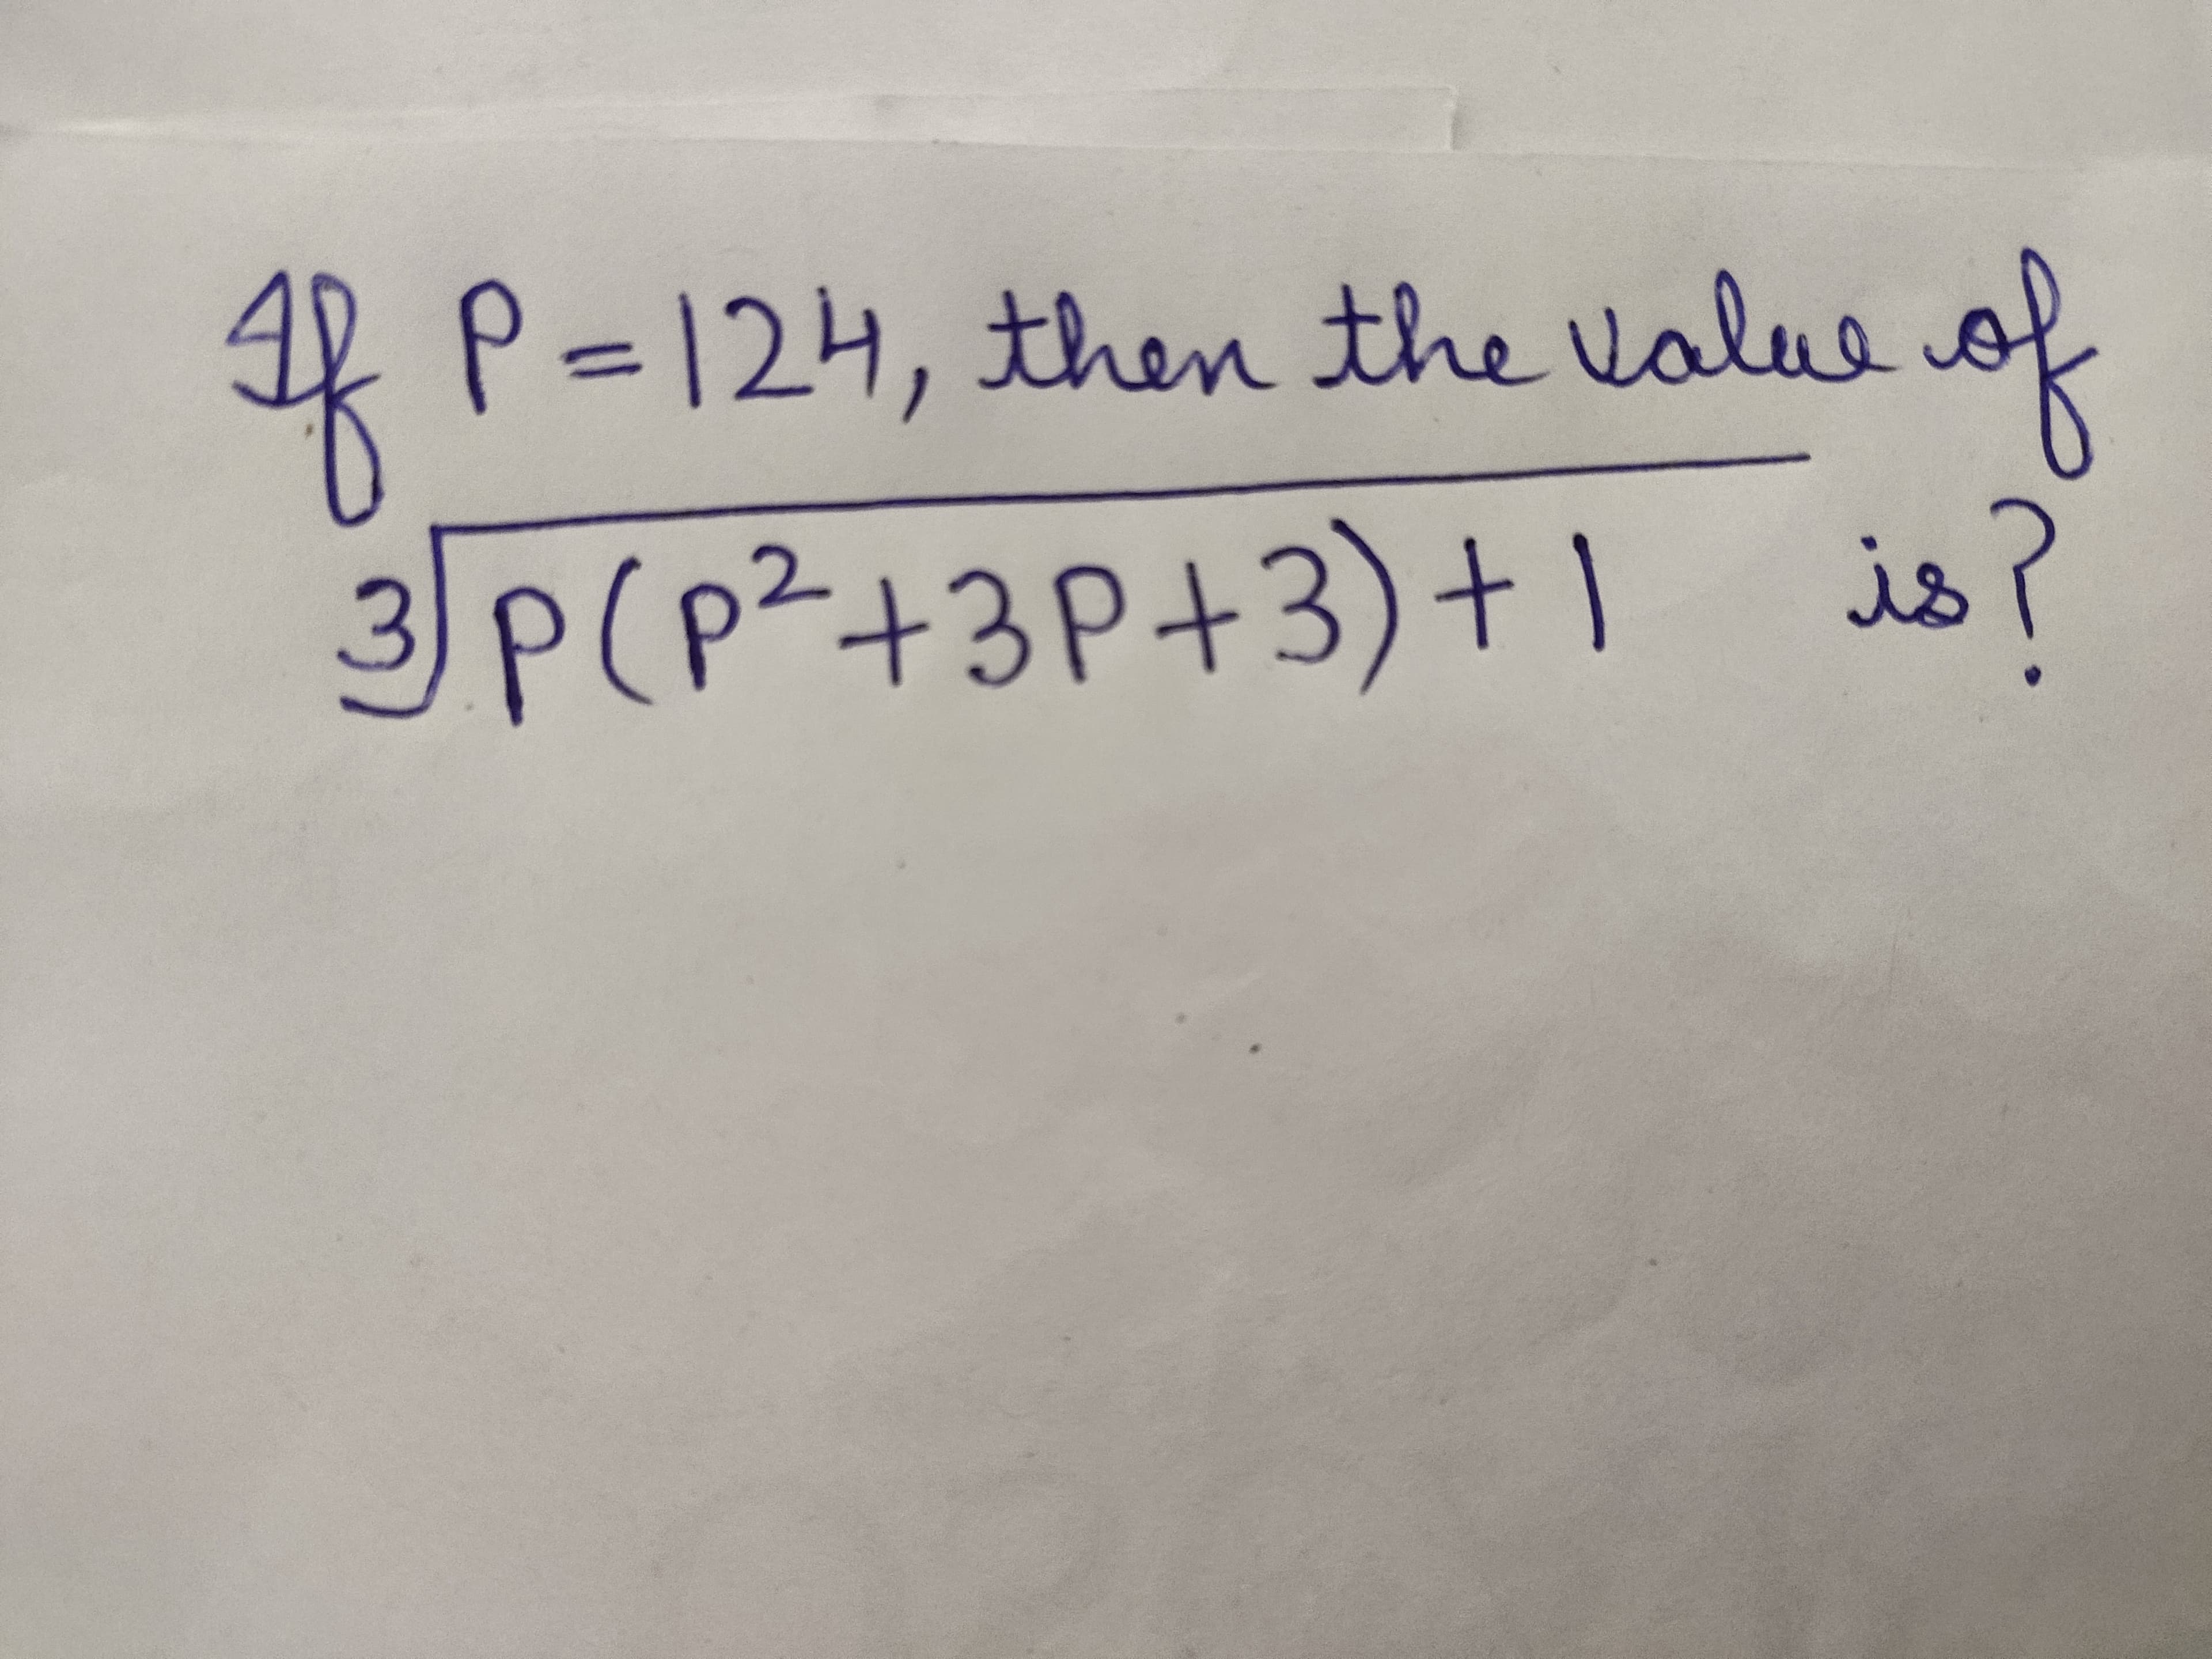 & P=124, then the value of
is?
3P(p²+3P+3)+1
